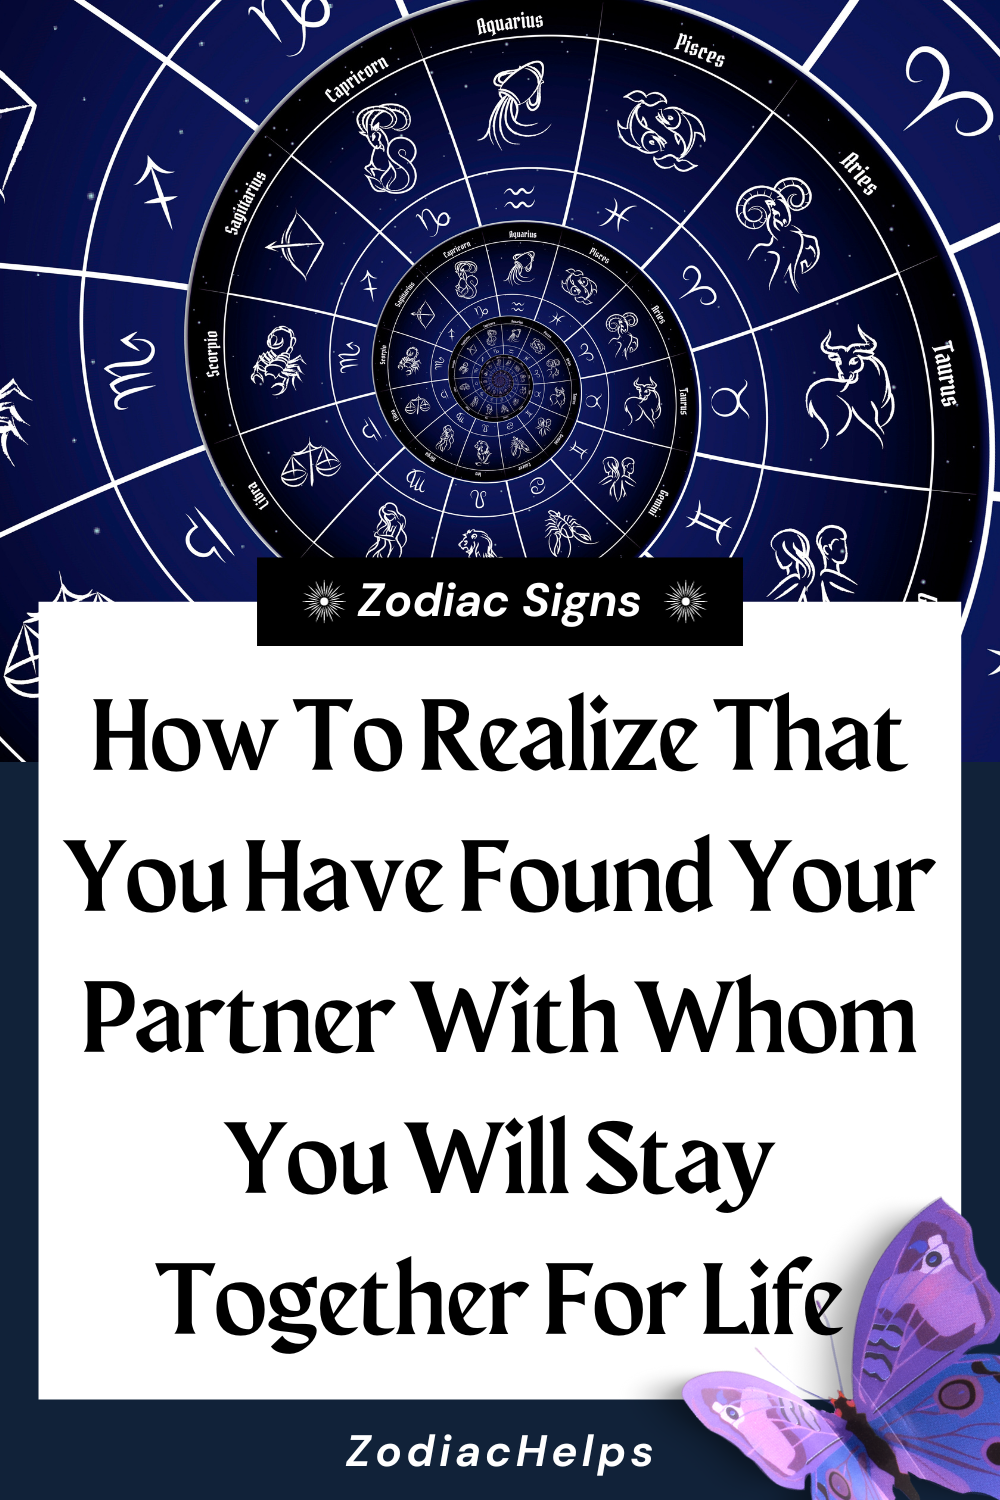 How To Realize That You Have Found Your Partner With Whom You Will Stay Together For Life